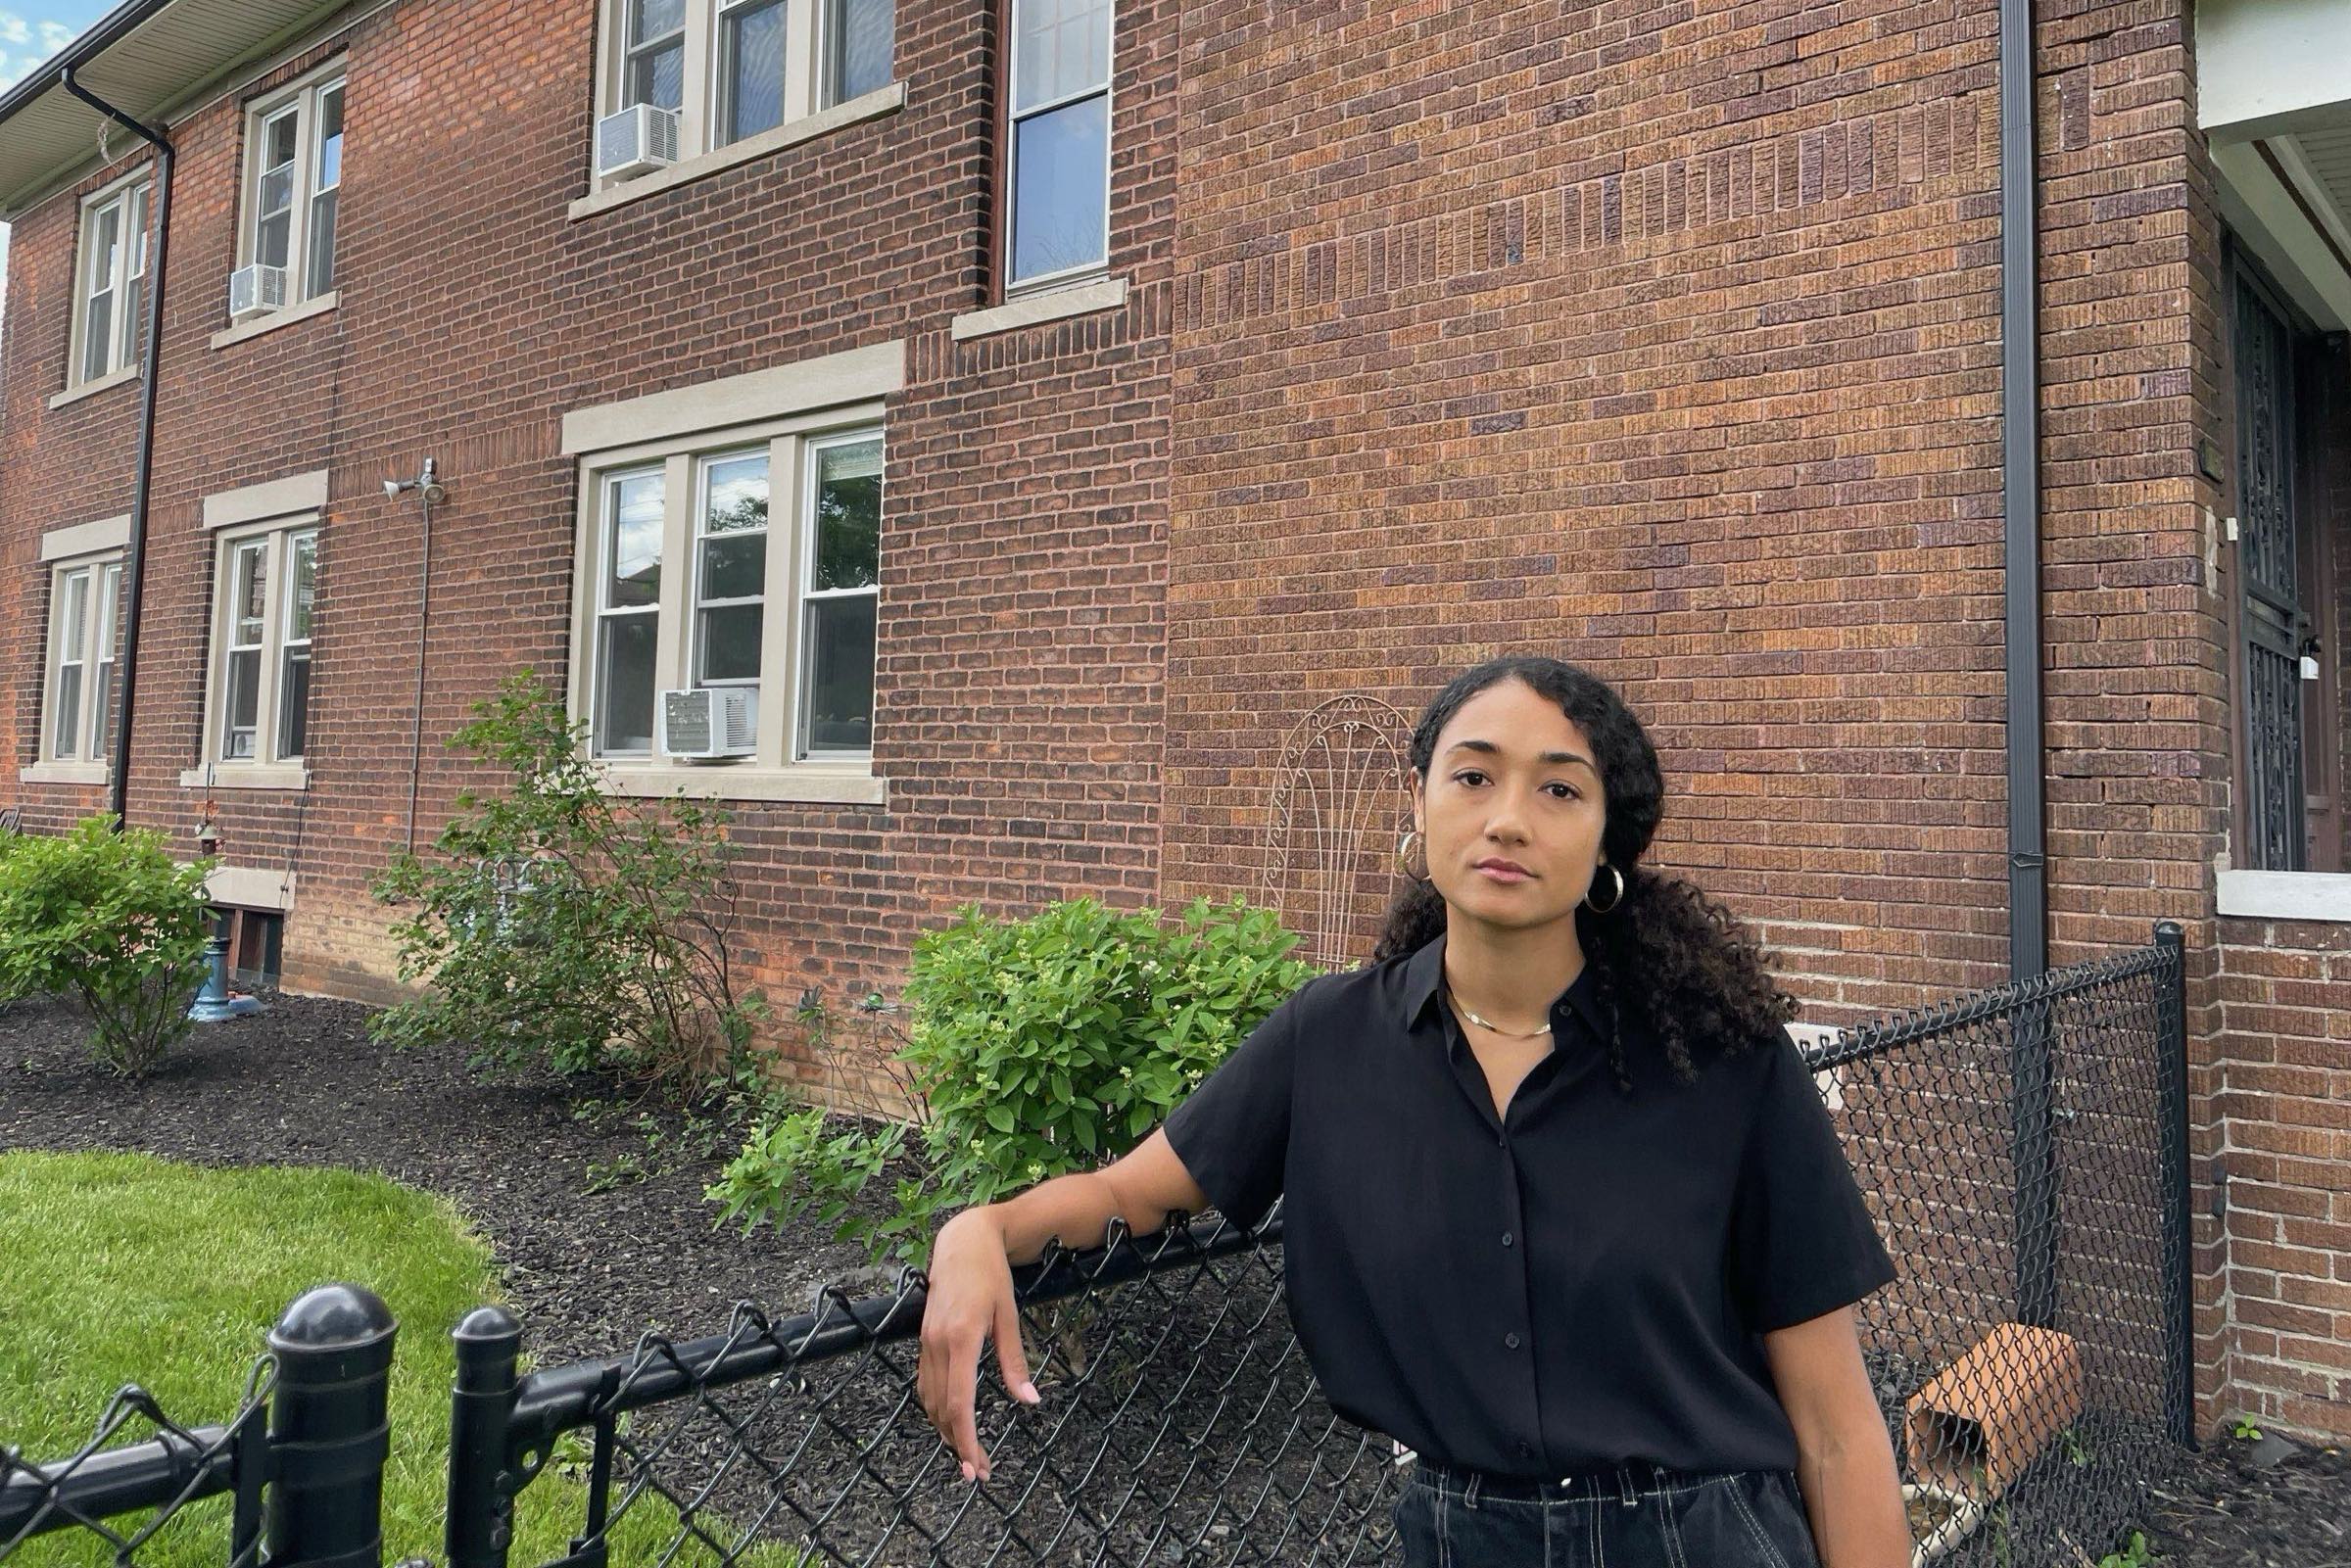 Black woman in black shirt stands outside a brick, two-story house.